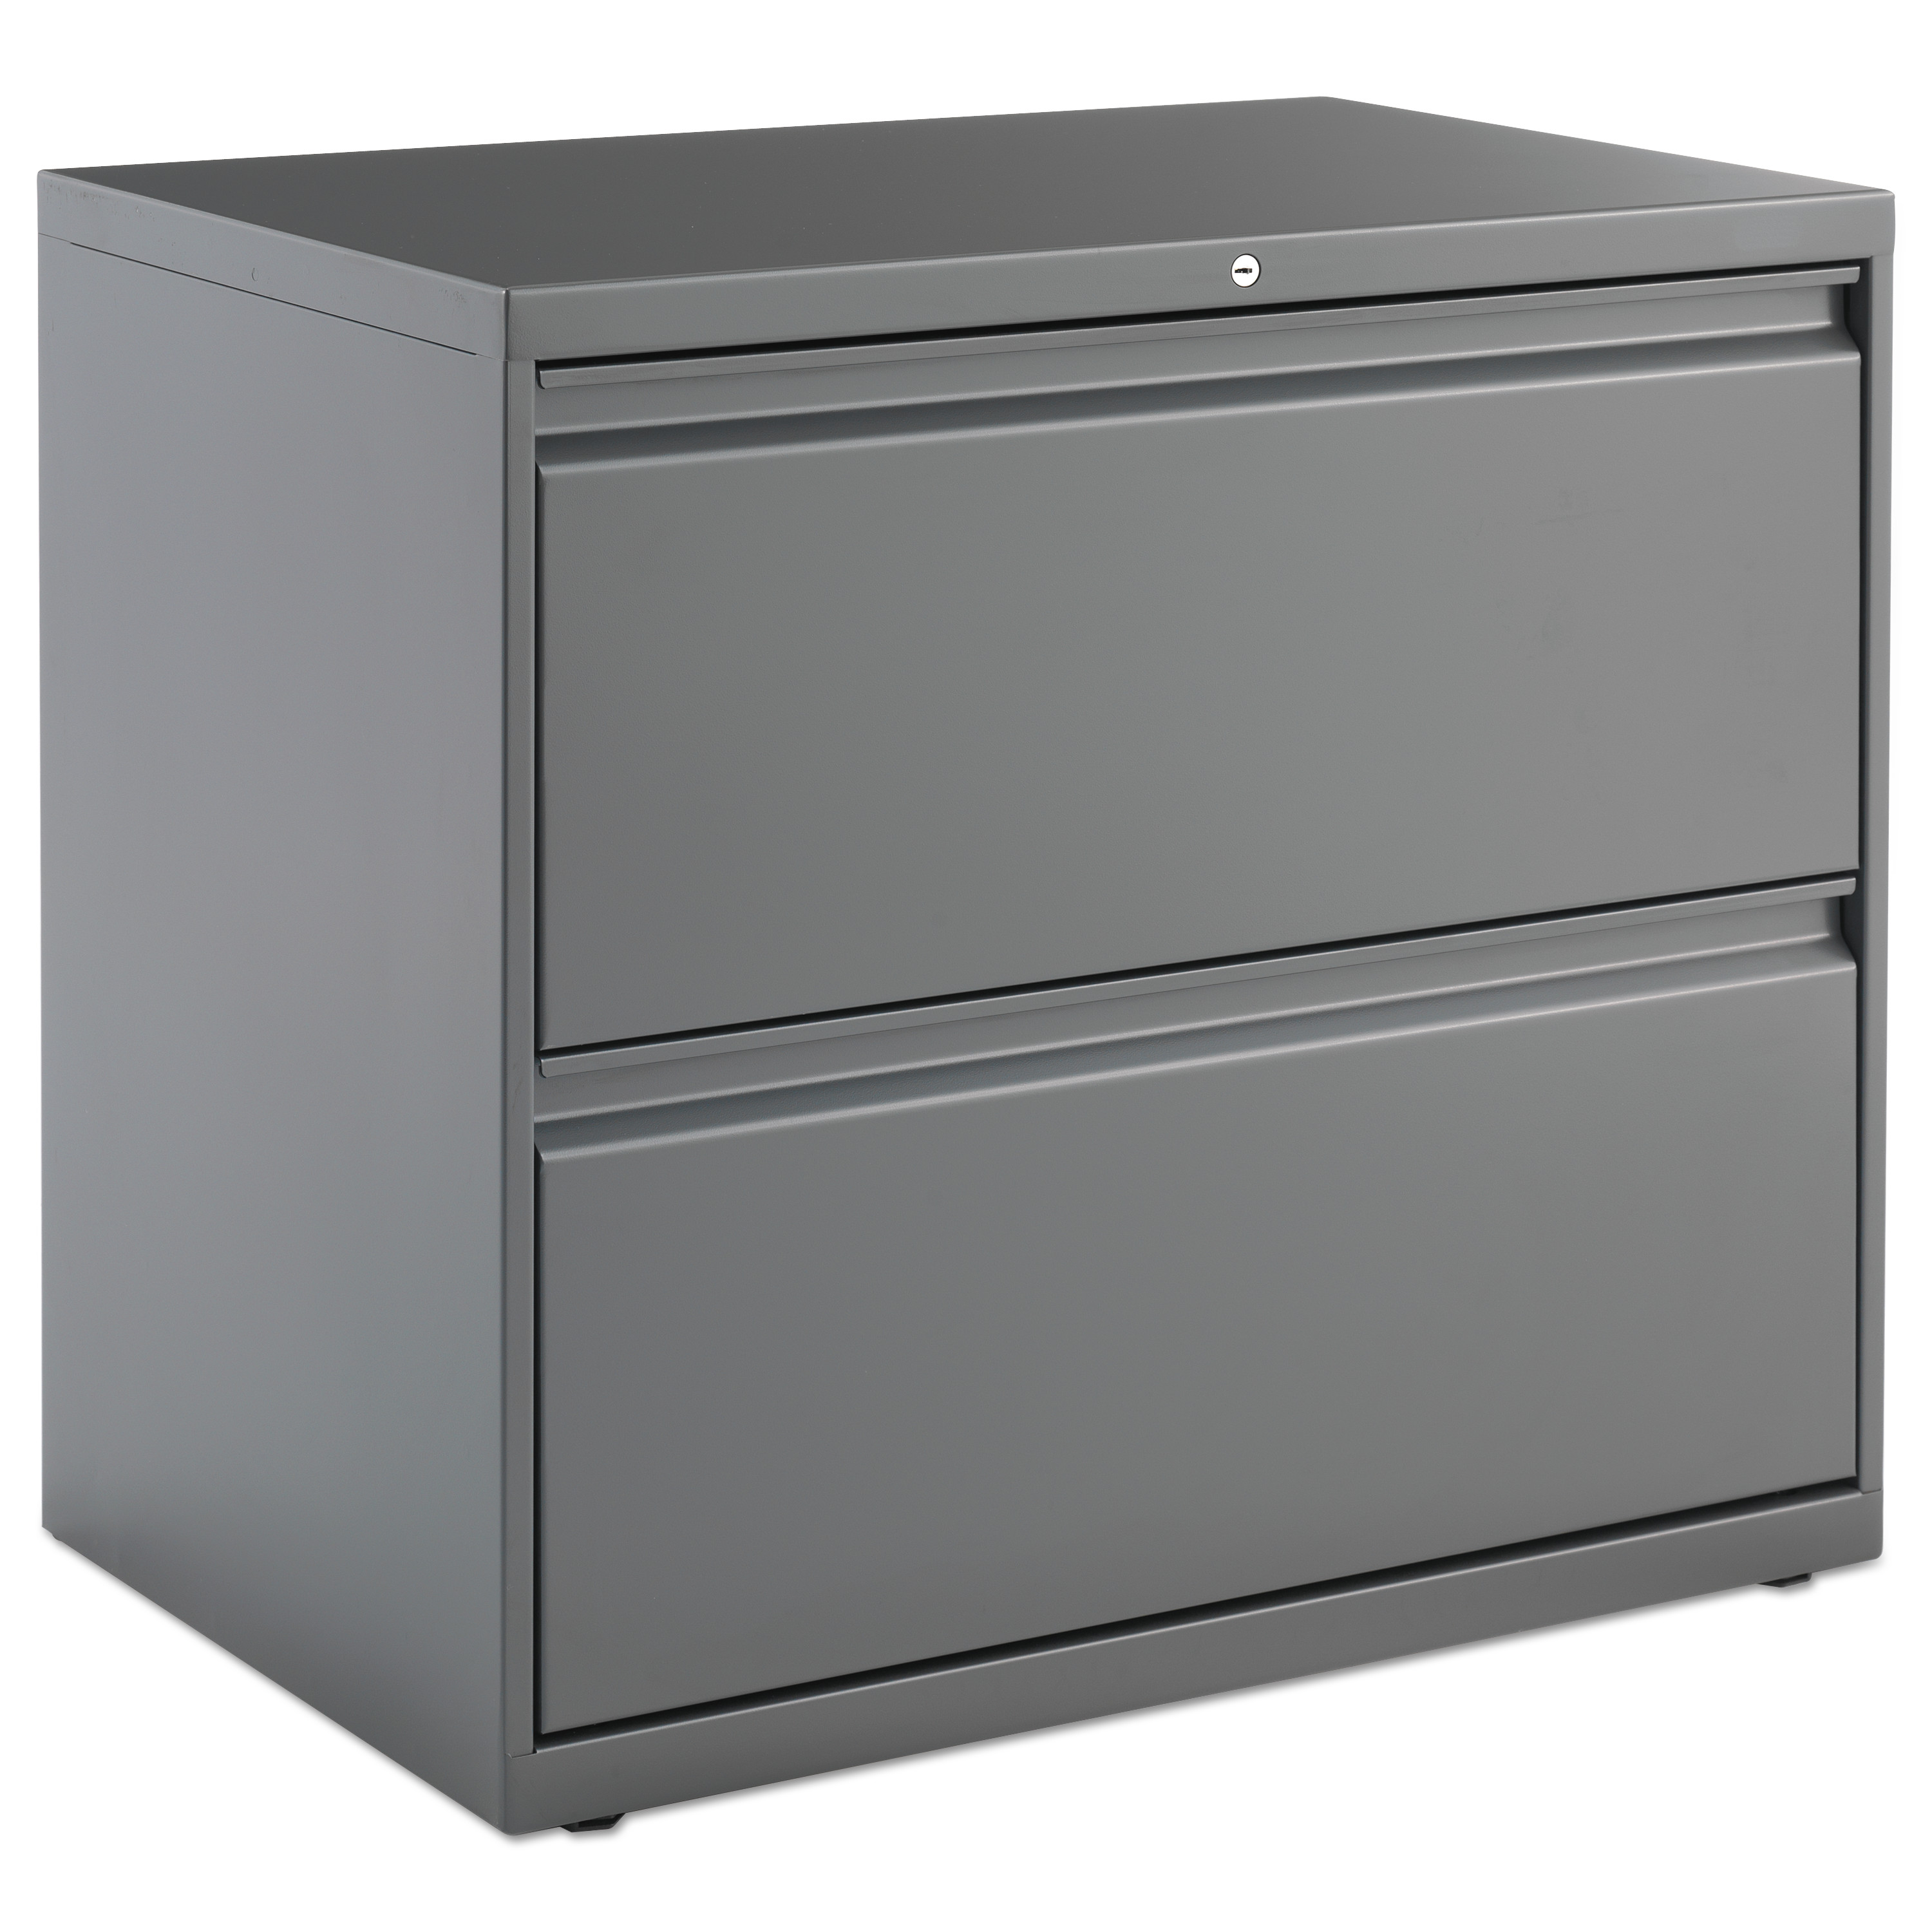 Alera Lateral File, 2 Drawer, 30w x 19.25d x 28.38h, Charcoal - image 2 of 2